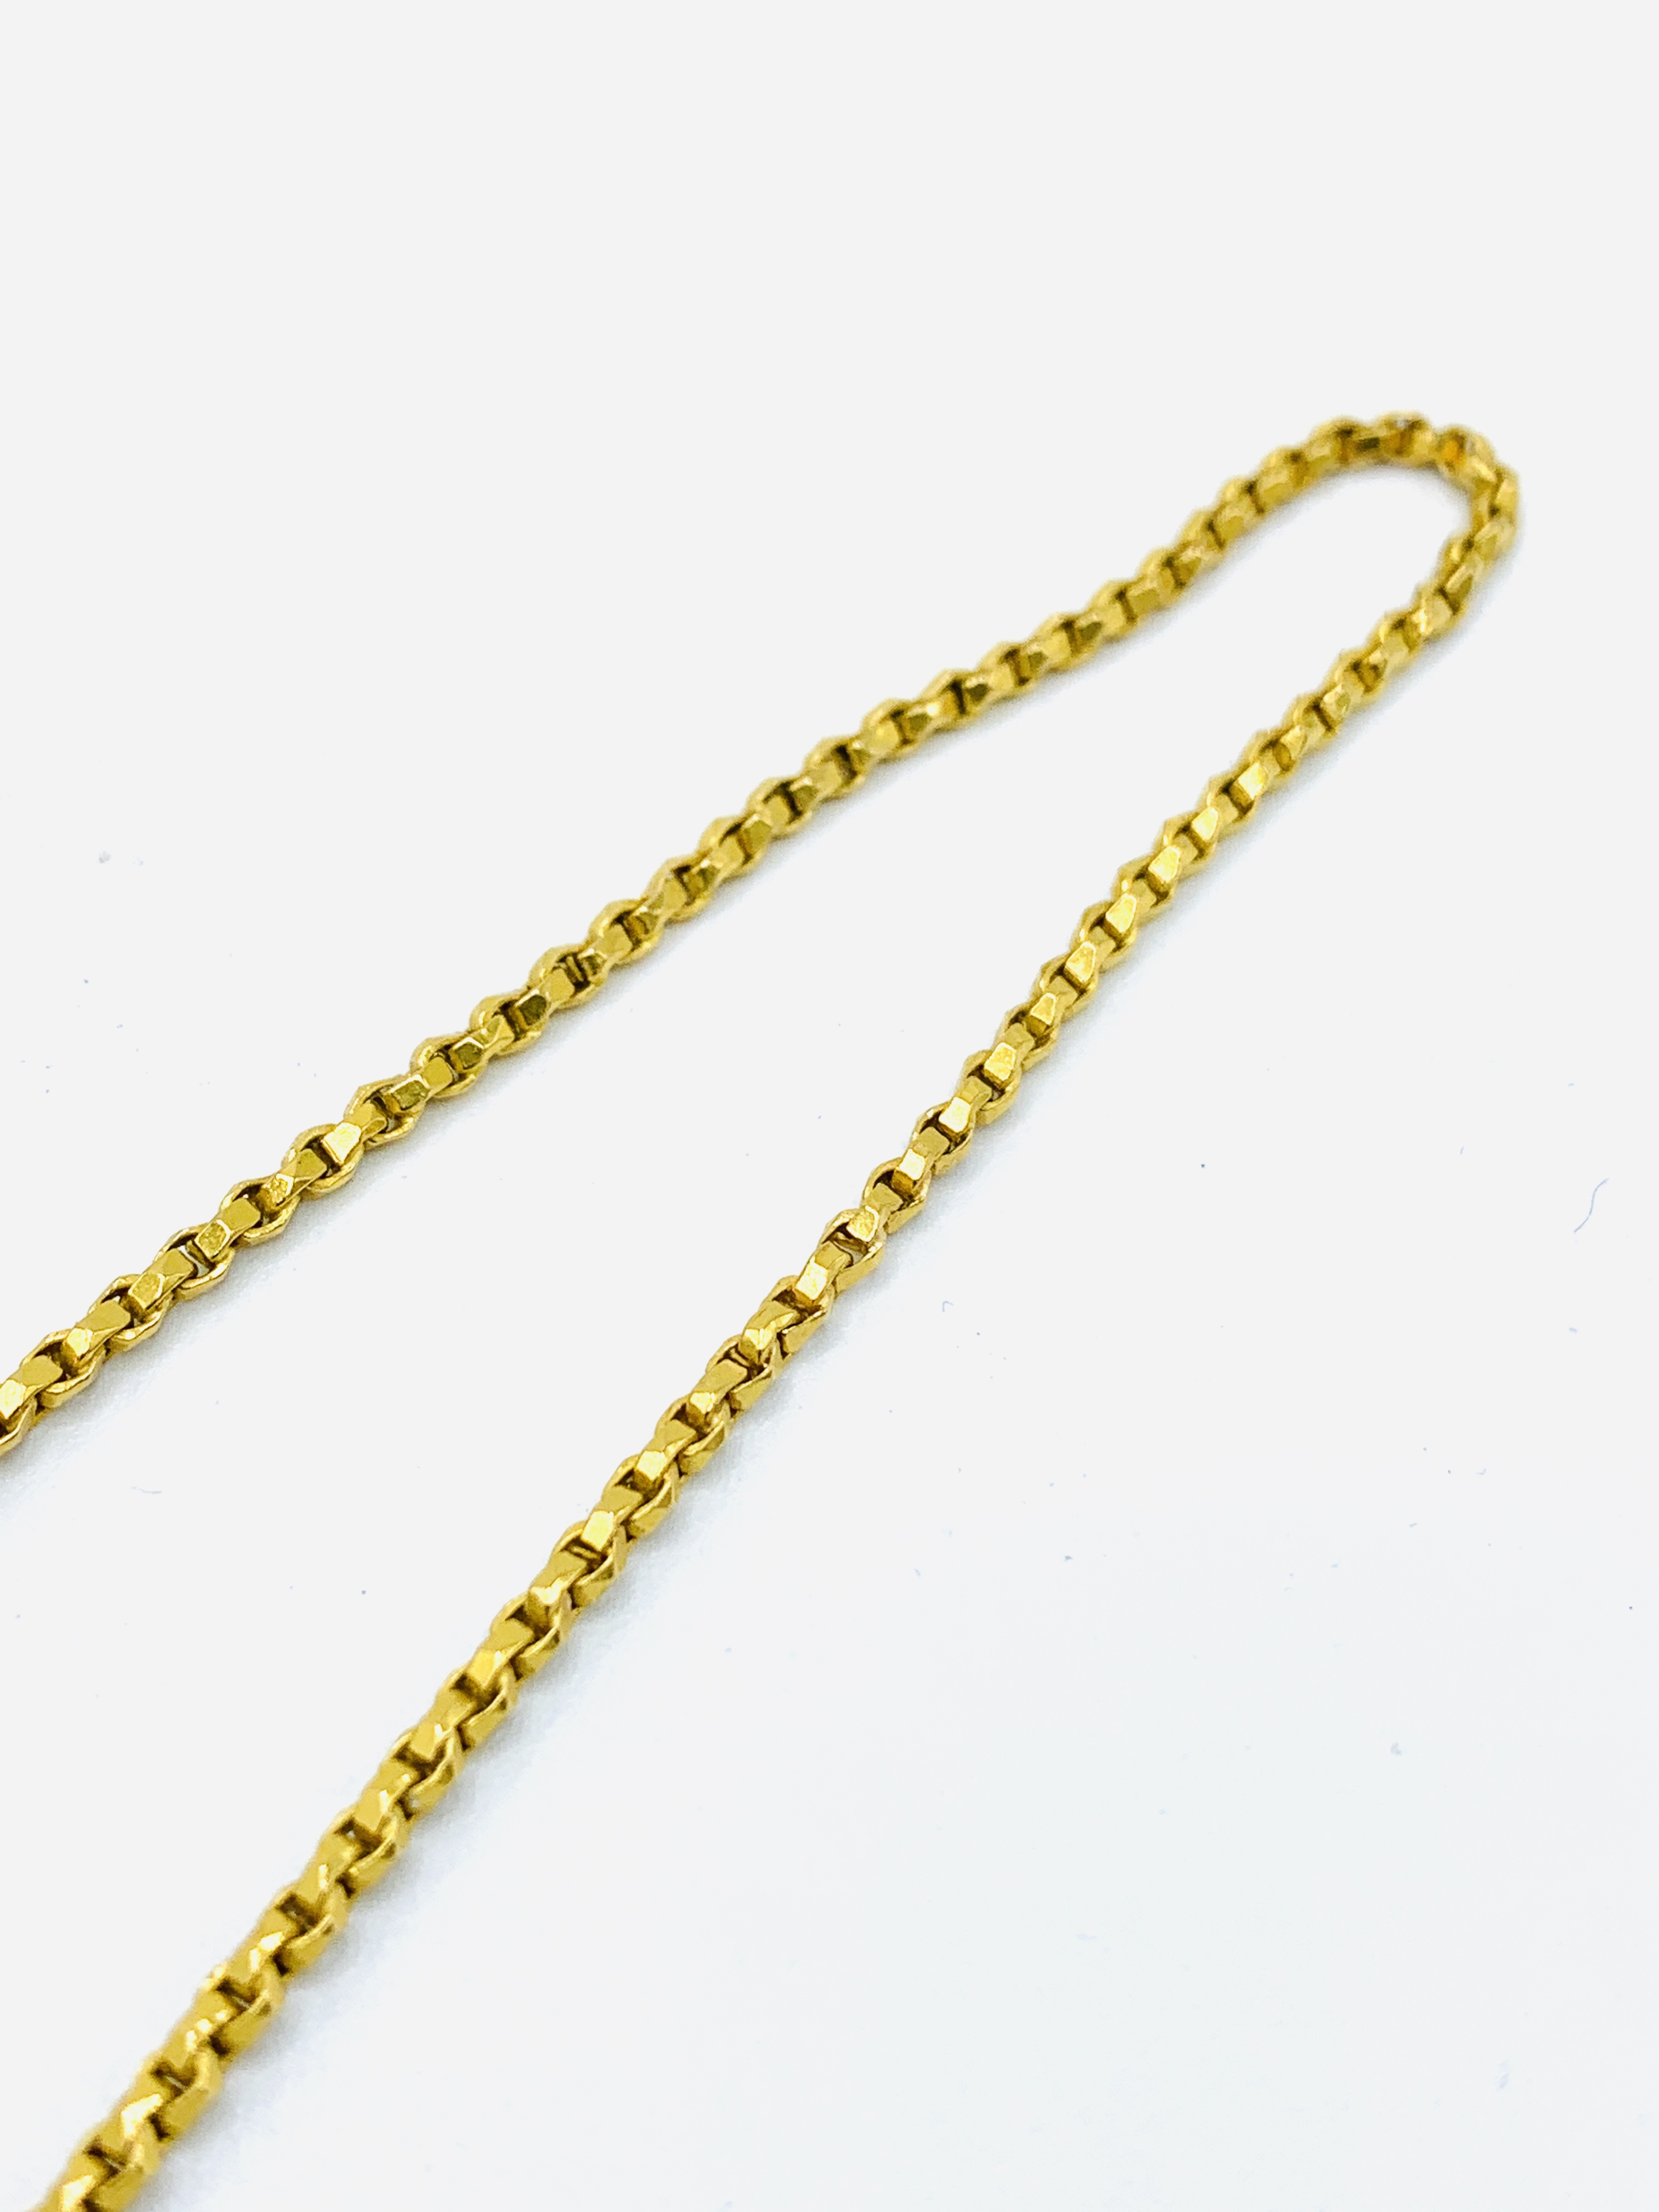 18ct gold chain - Image 2 of 5